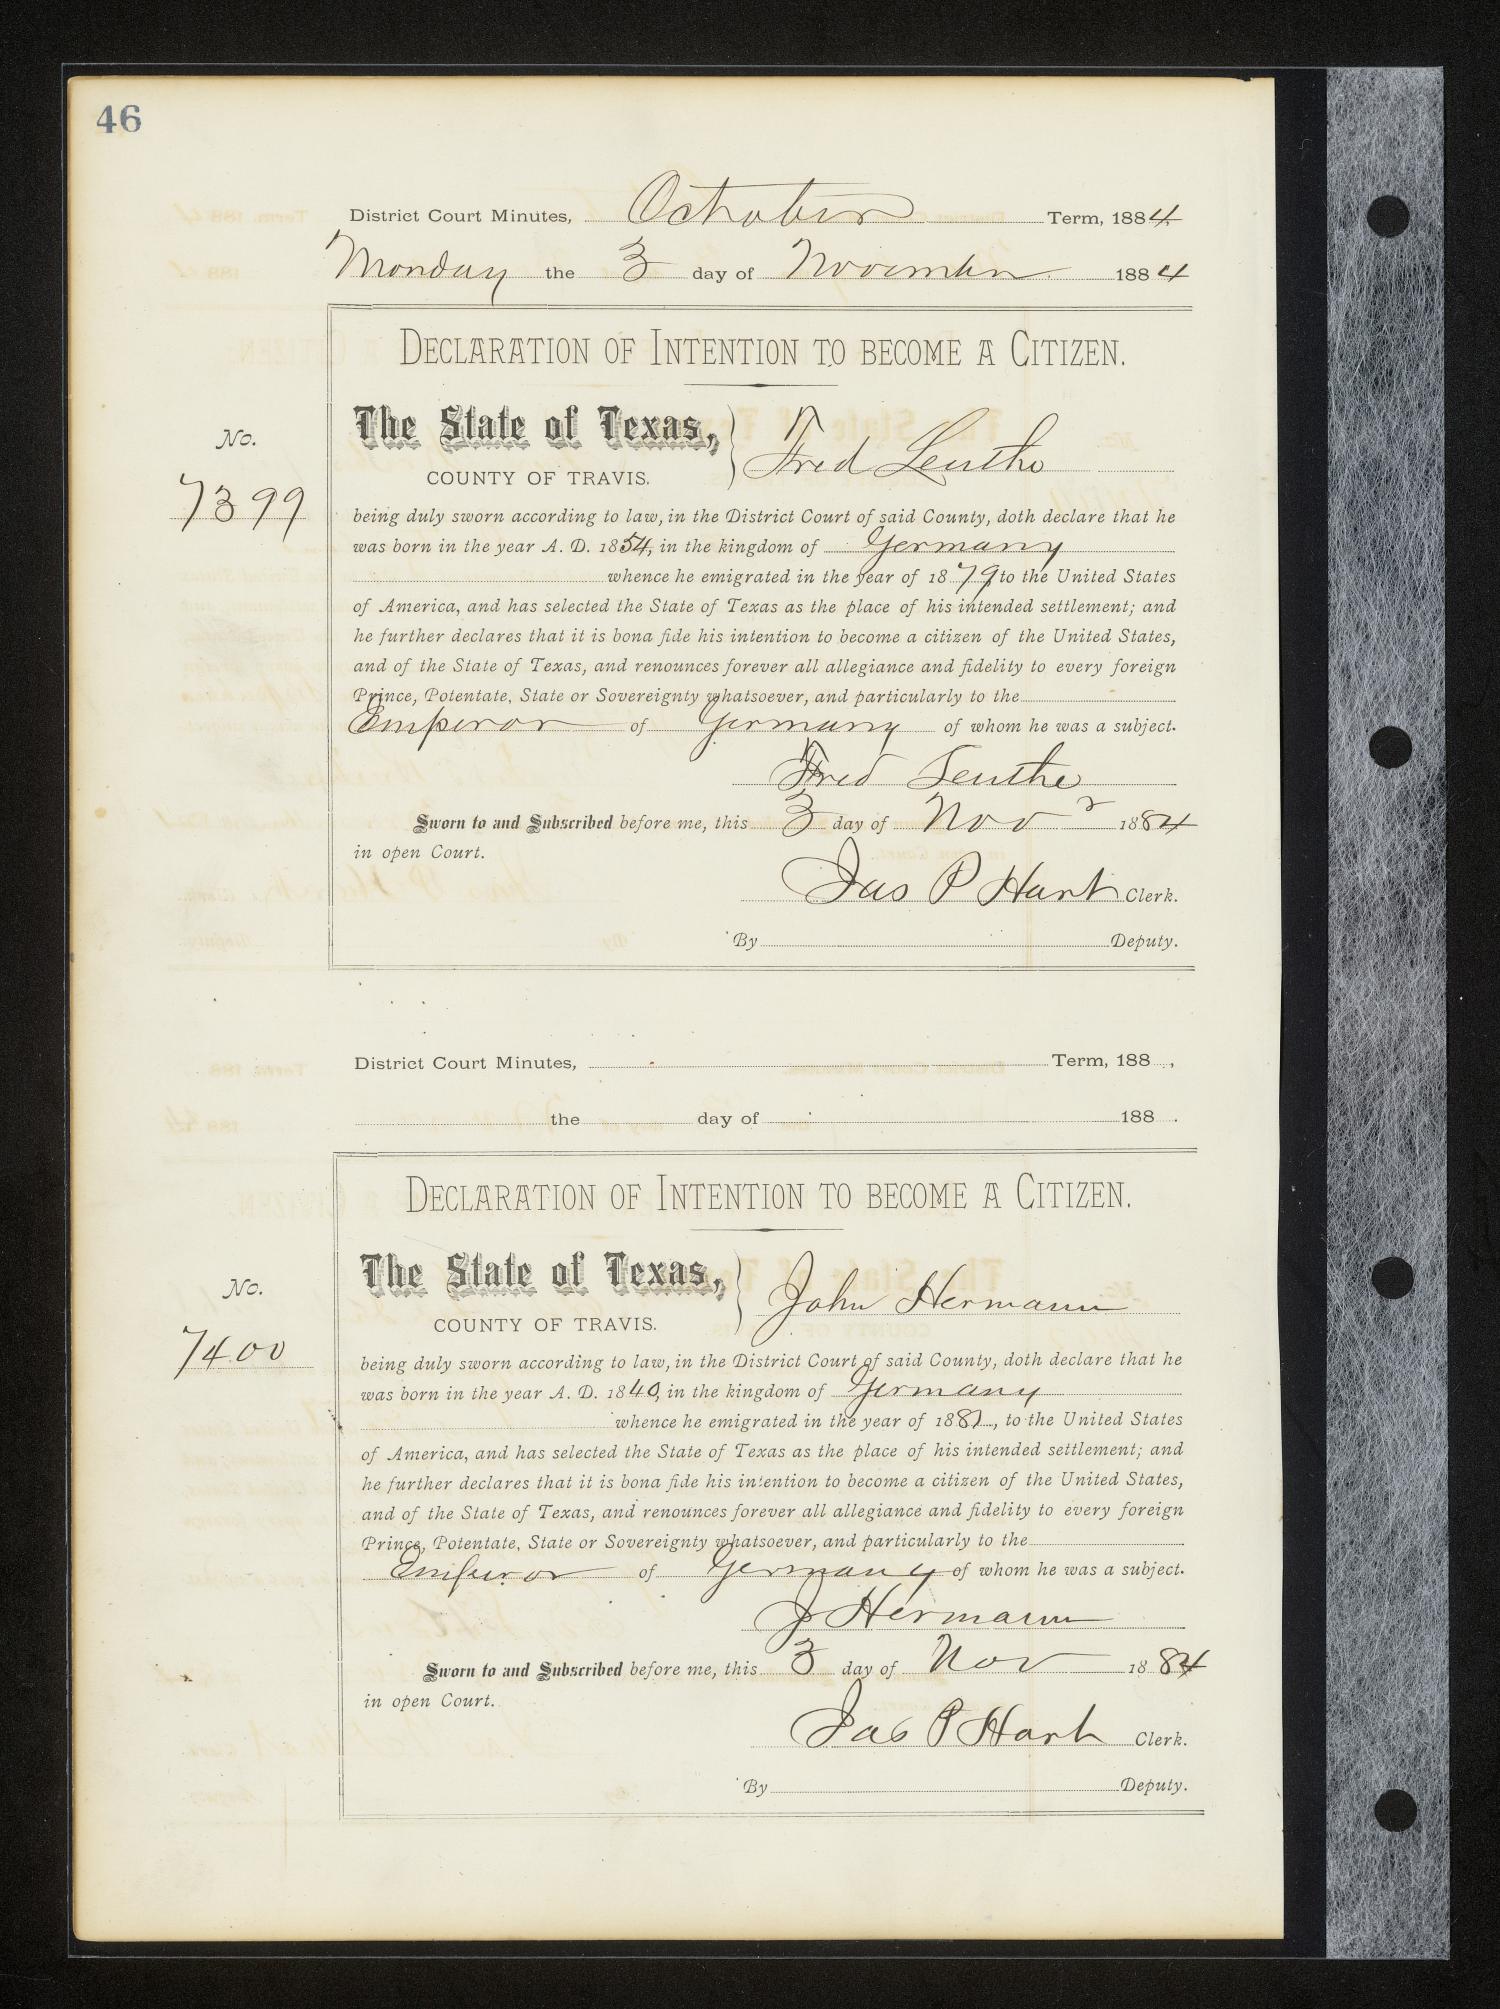 Travis County Naturalization Records: Declaration Minutes A, pages 1-208
                                                
                                                    46
                                                